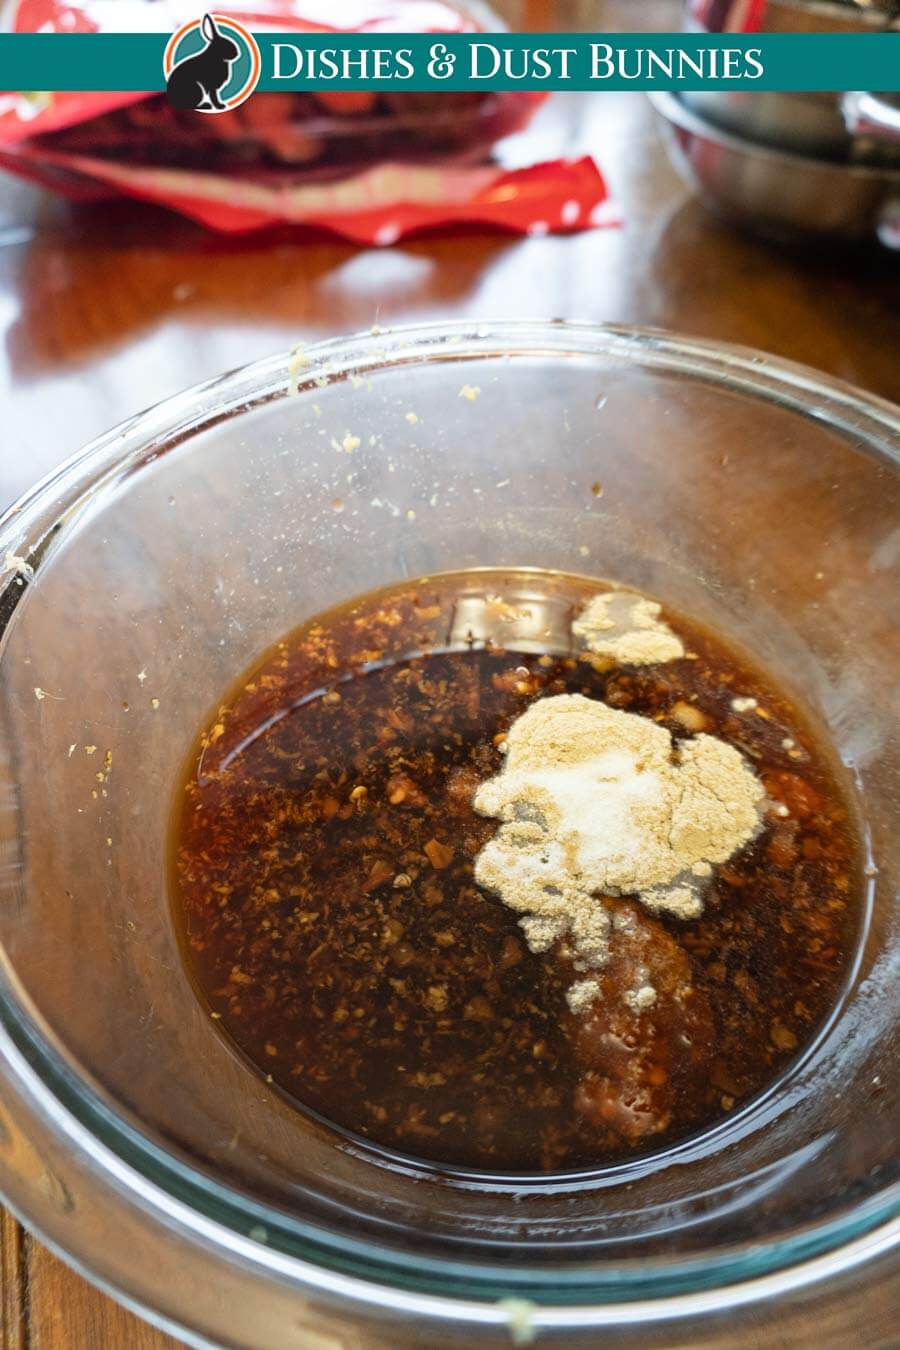 Hot and Sour Soup seasoning mix